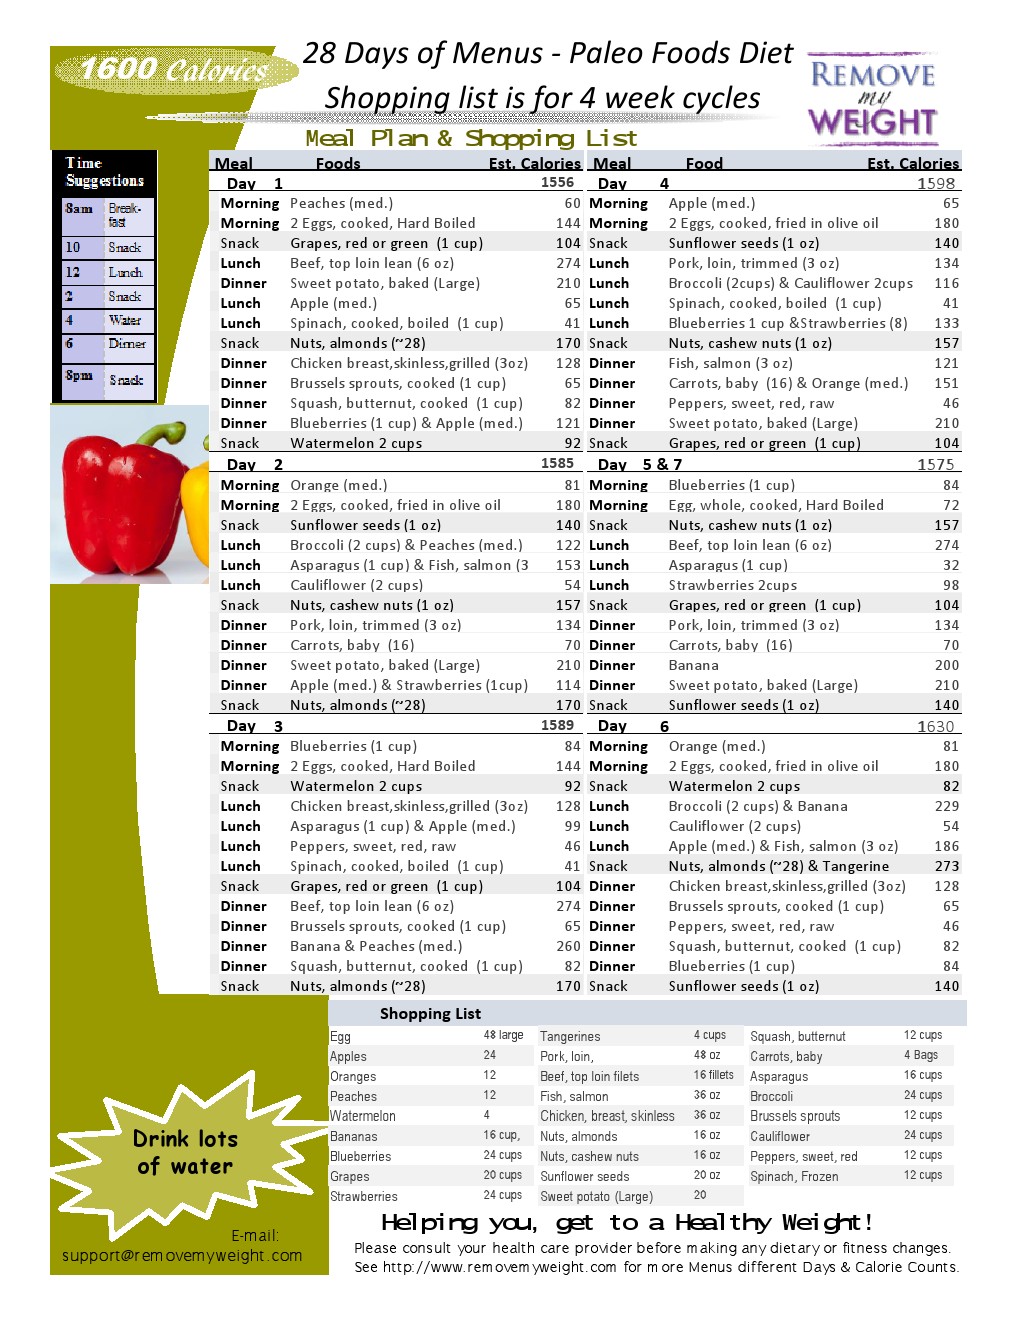 easy-day-diet-weight-loss-meal-plan-noom-inc-30-day-diet-chart-for